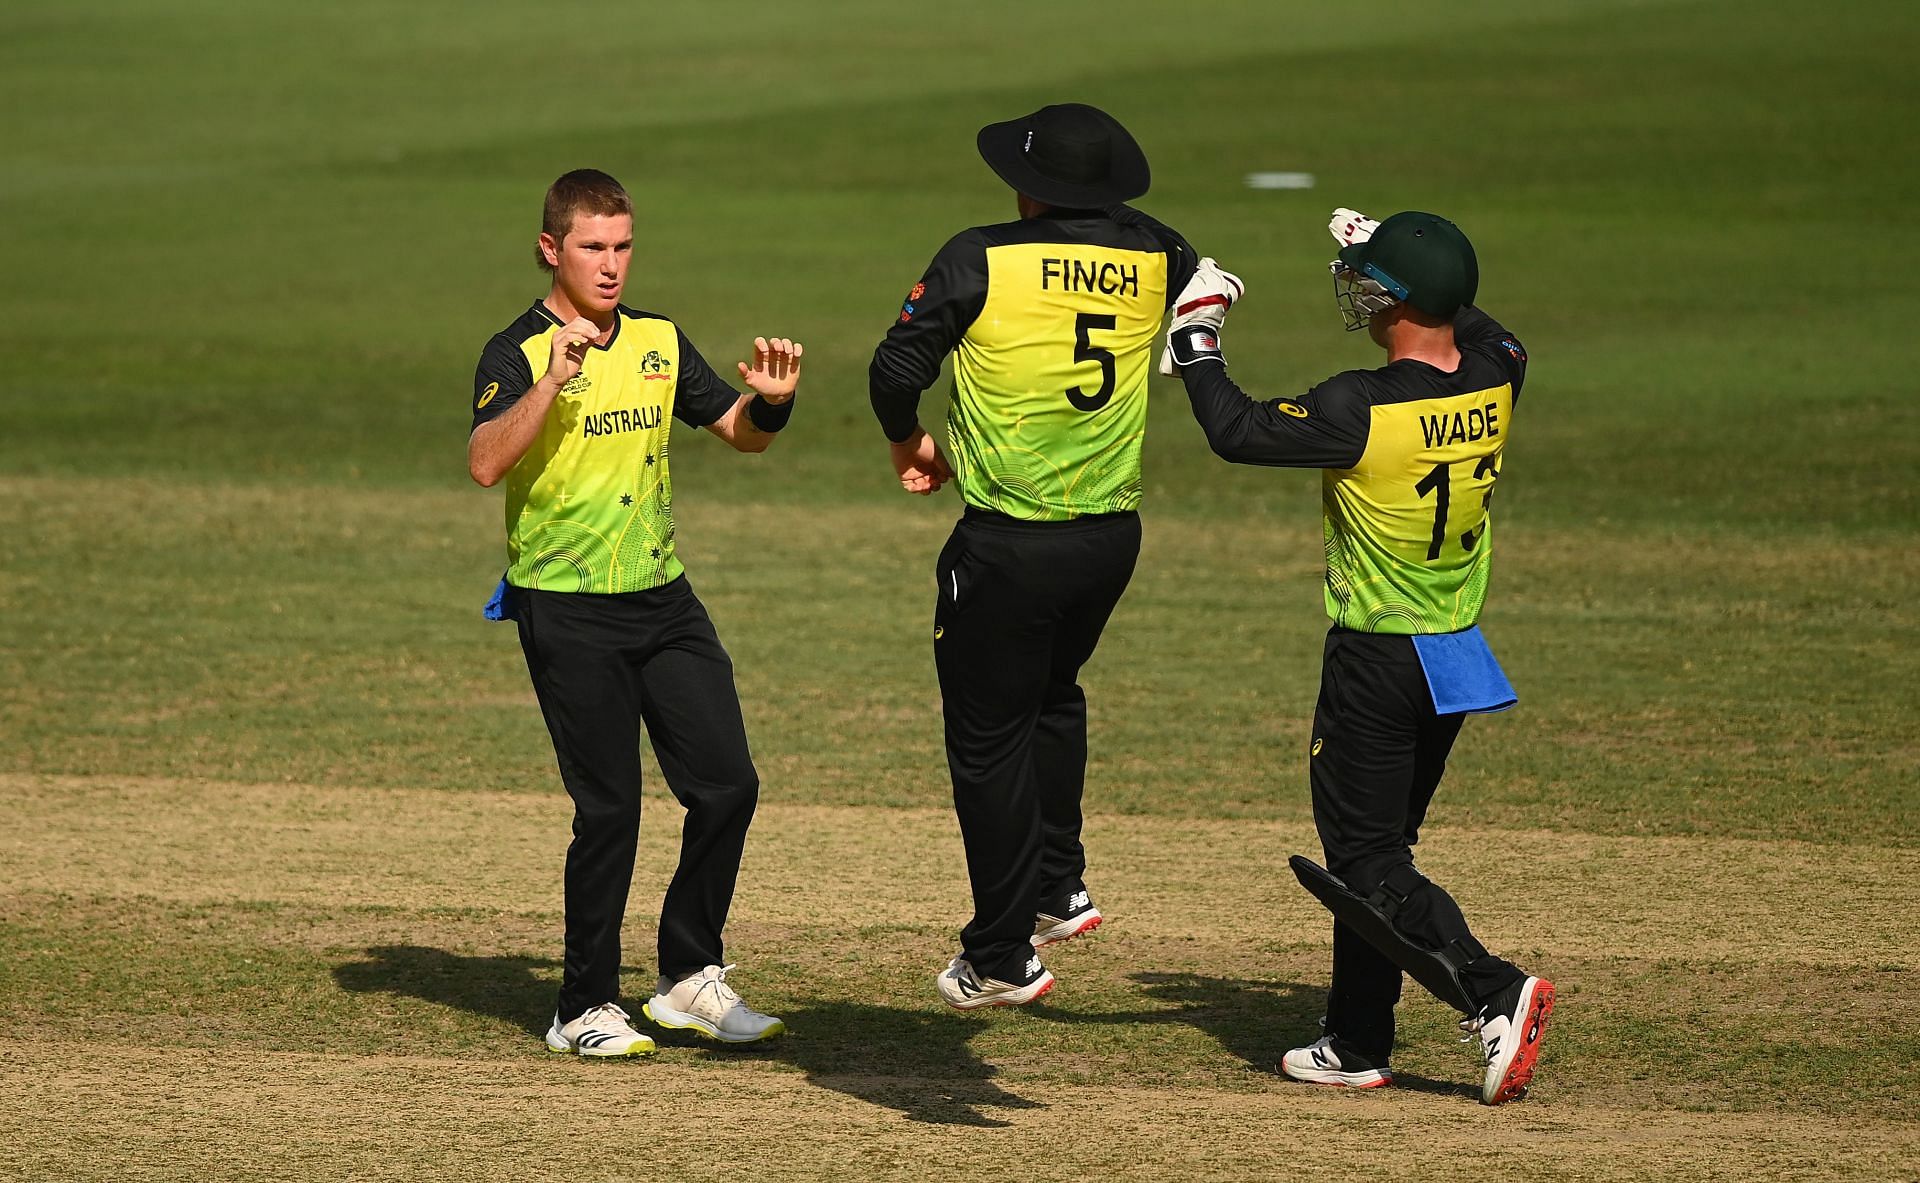 Adam Zampa (left) celebrates the wicket of Afif Hossain. Pic: Getty Images